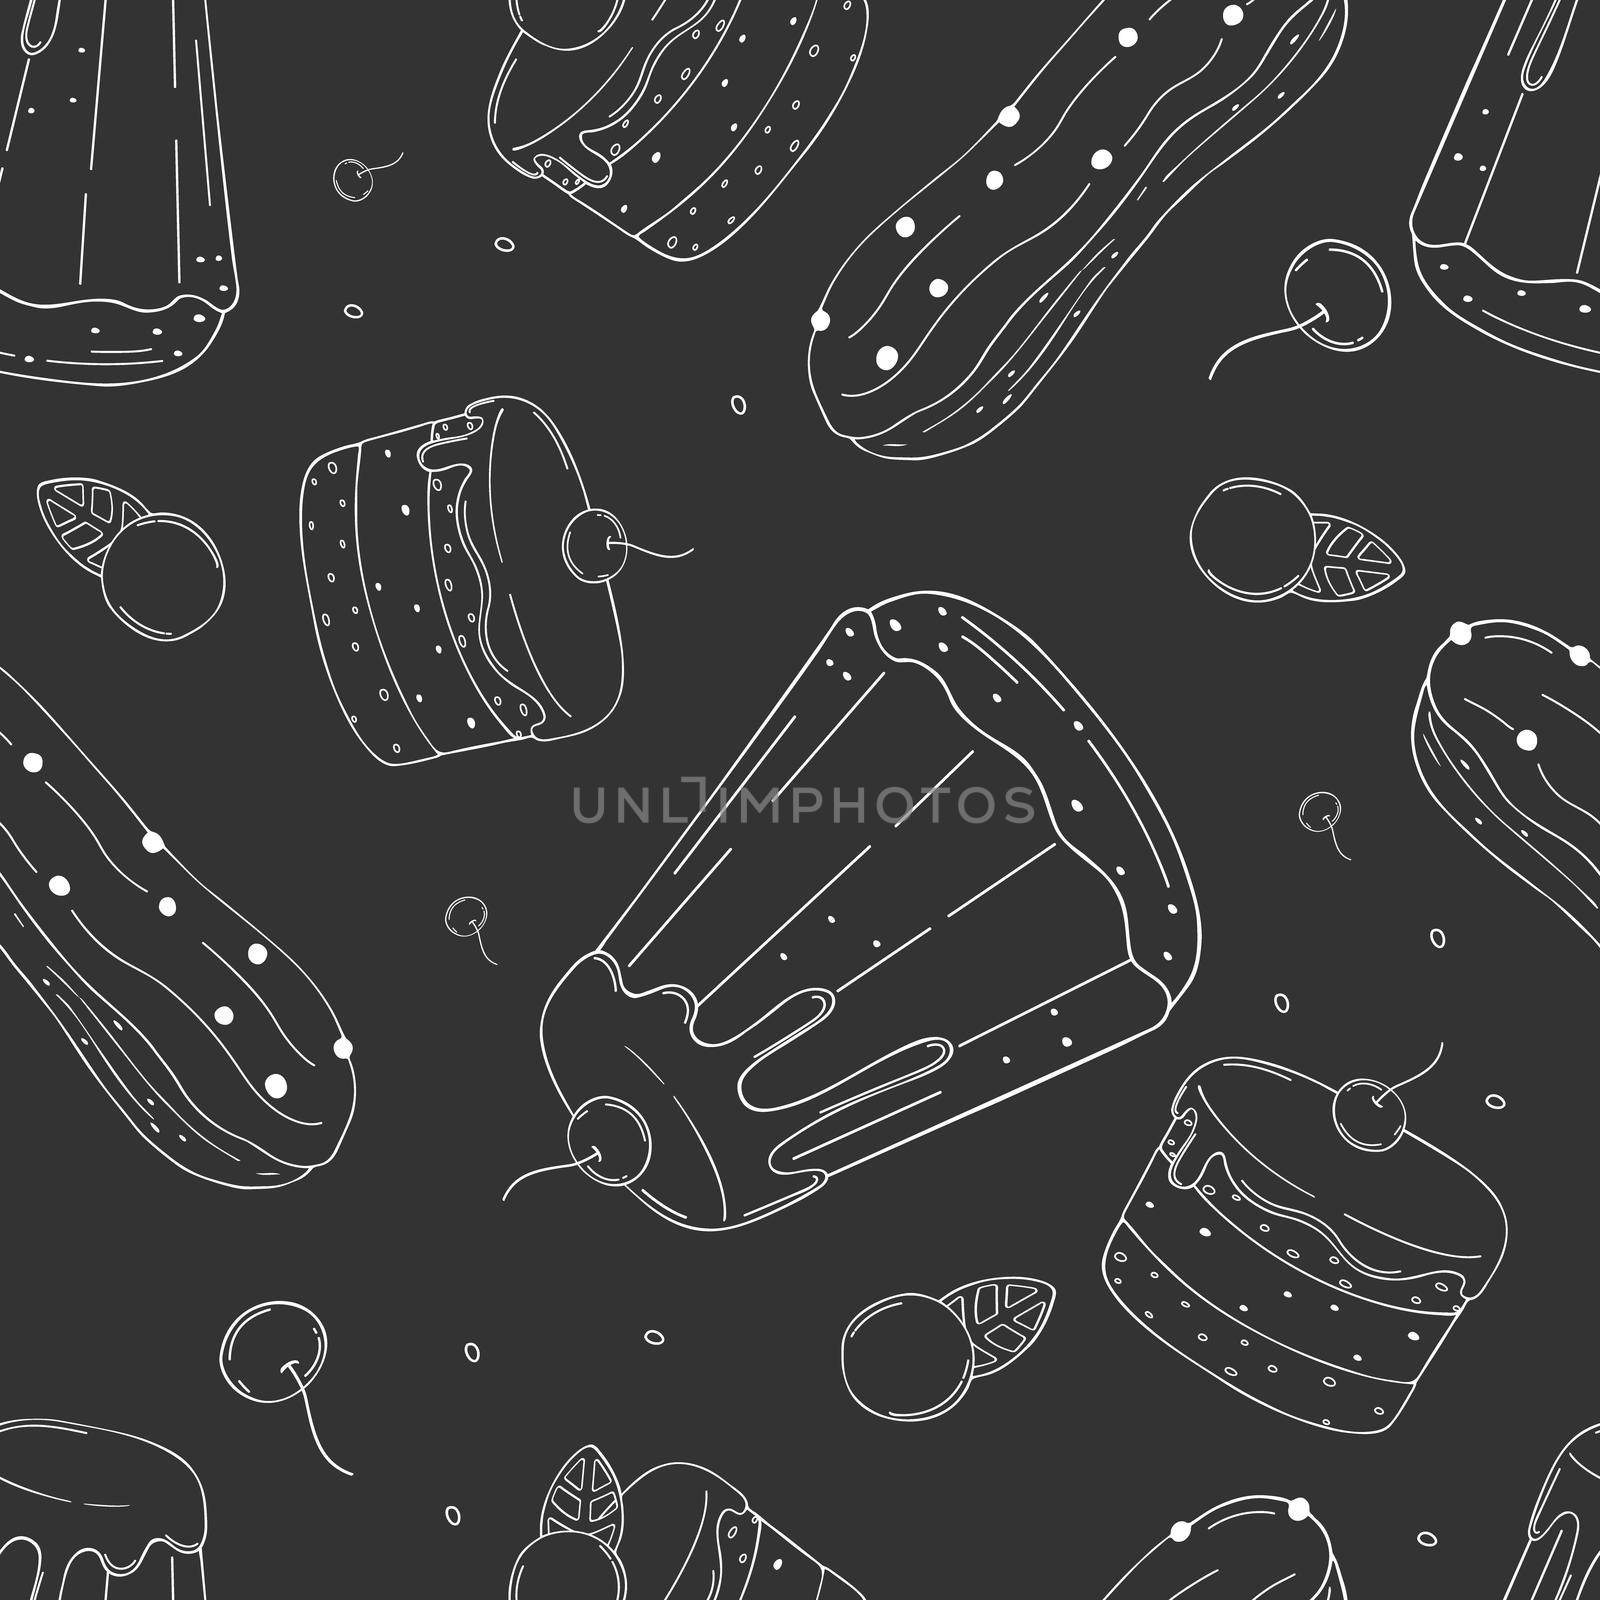 Seamless pattern of elements with hand drawn pastry on chalkboard background. by Lena_Khmelniuk